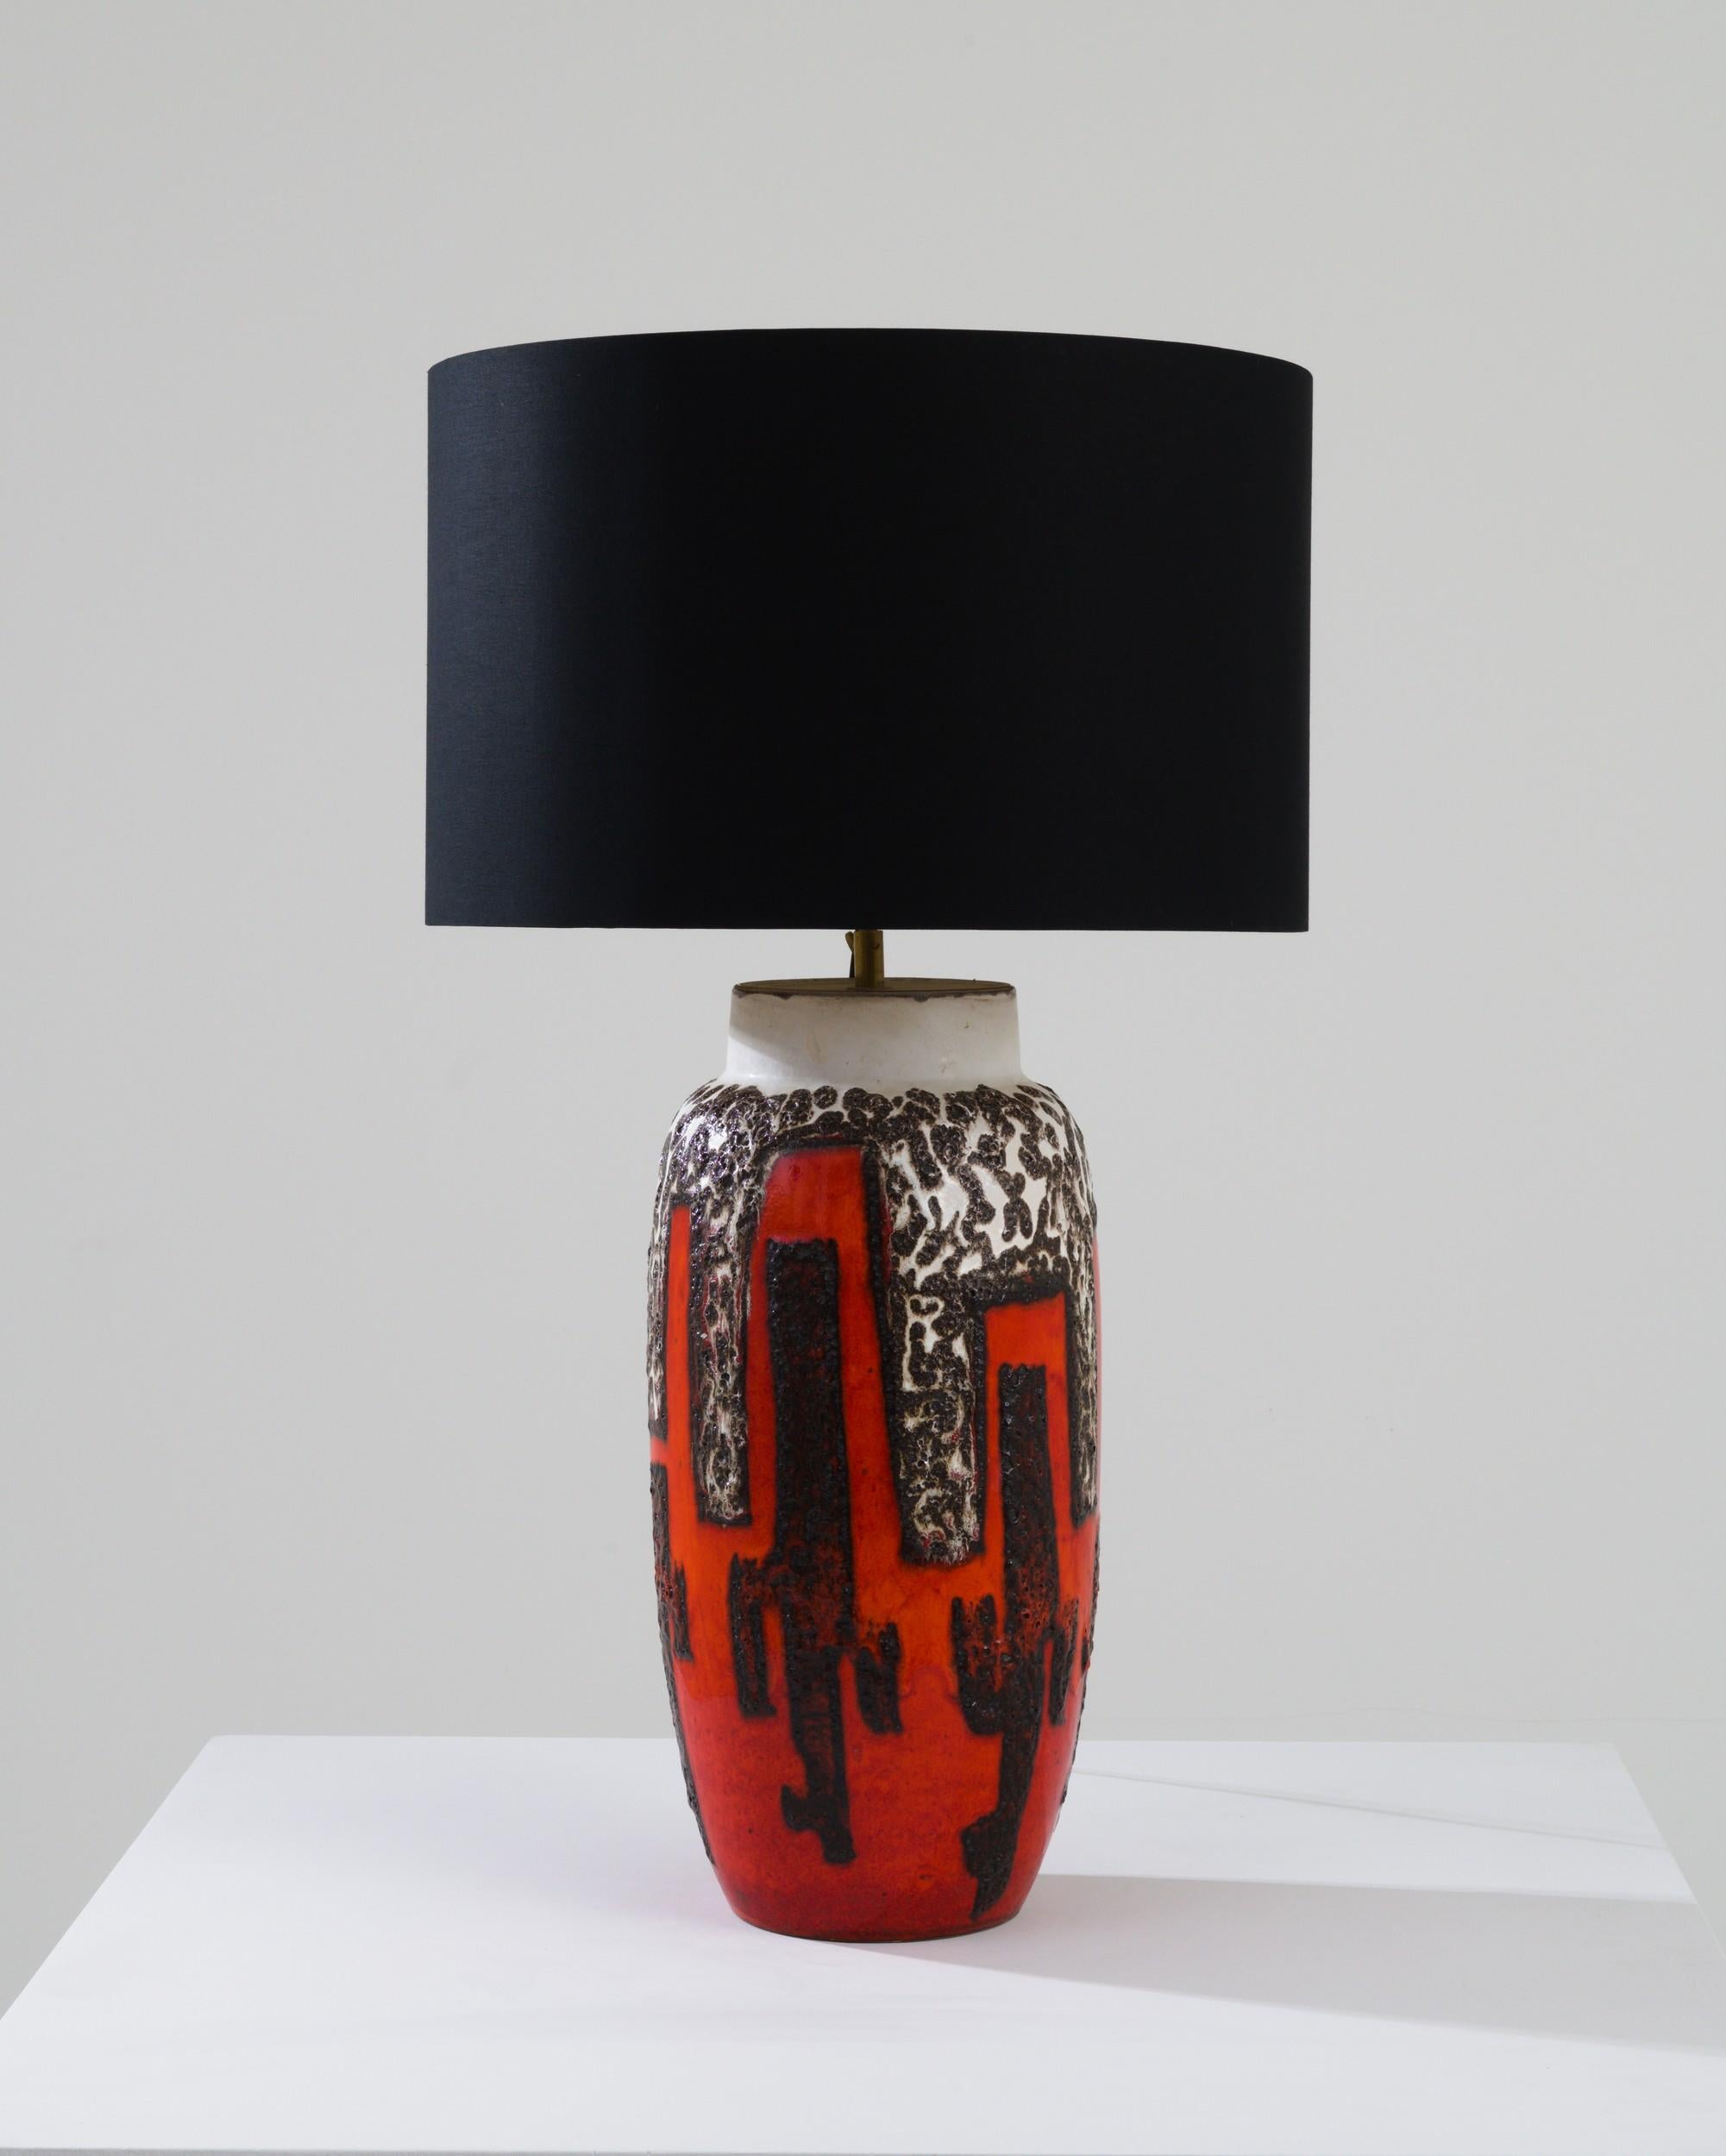 Designed in 1960s Germany, this distinctive lamp boasts a shallow, black lampshade held by a meticulously handcrafted ceramic base. The striking geometric patterns, adorned in vibrant hues reminiscent of the motifs found in abstract expressionist